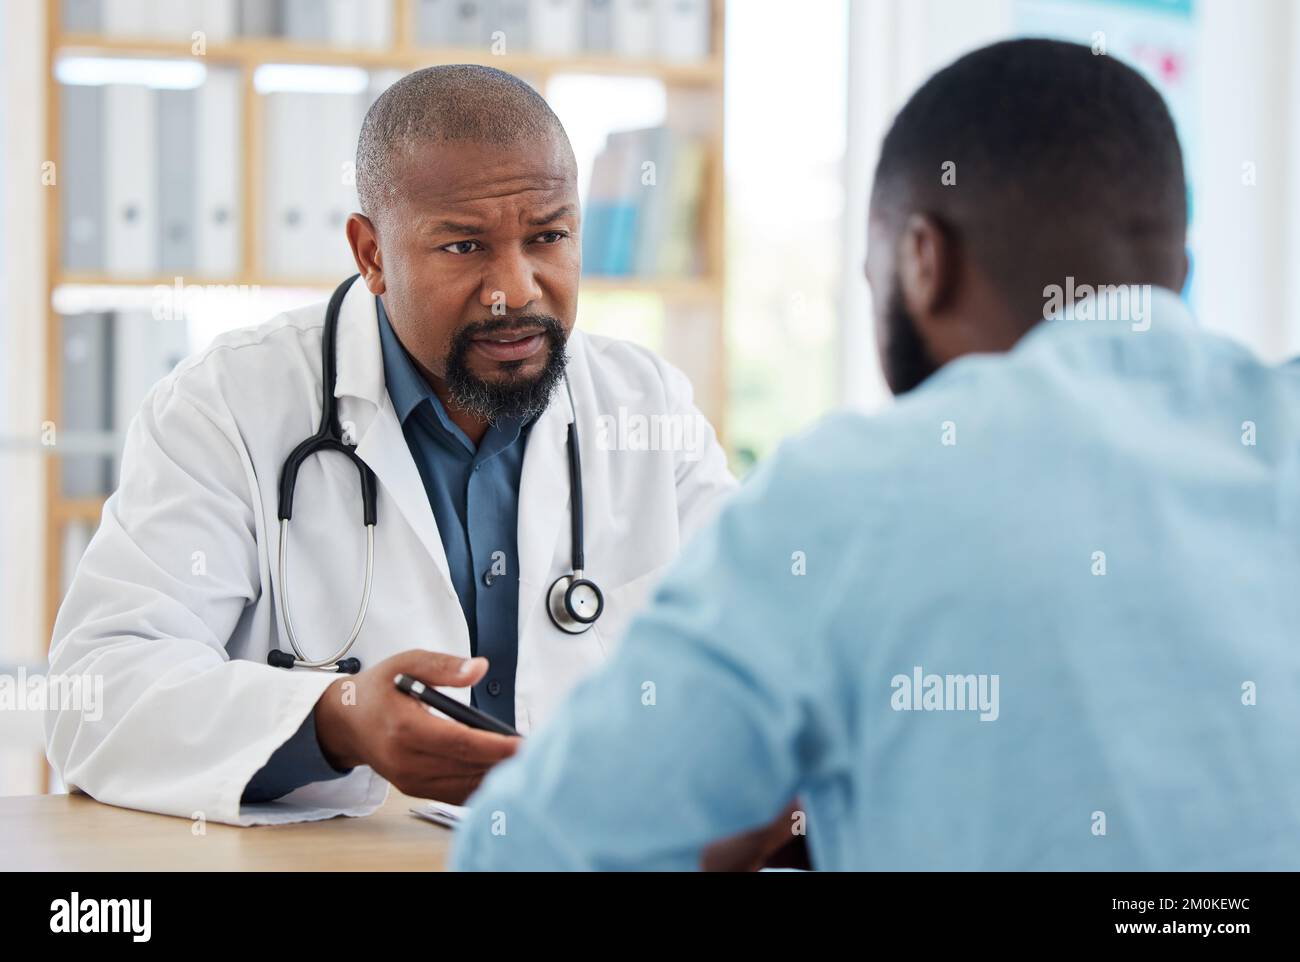 Serious doctor having a consult with a patient. Medical doctor talking to a patient about his results. African american patient speaking to his doctor Stock Photo